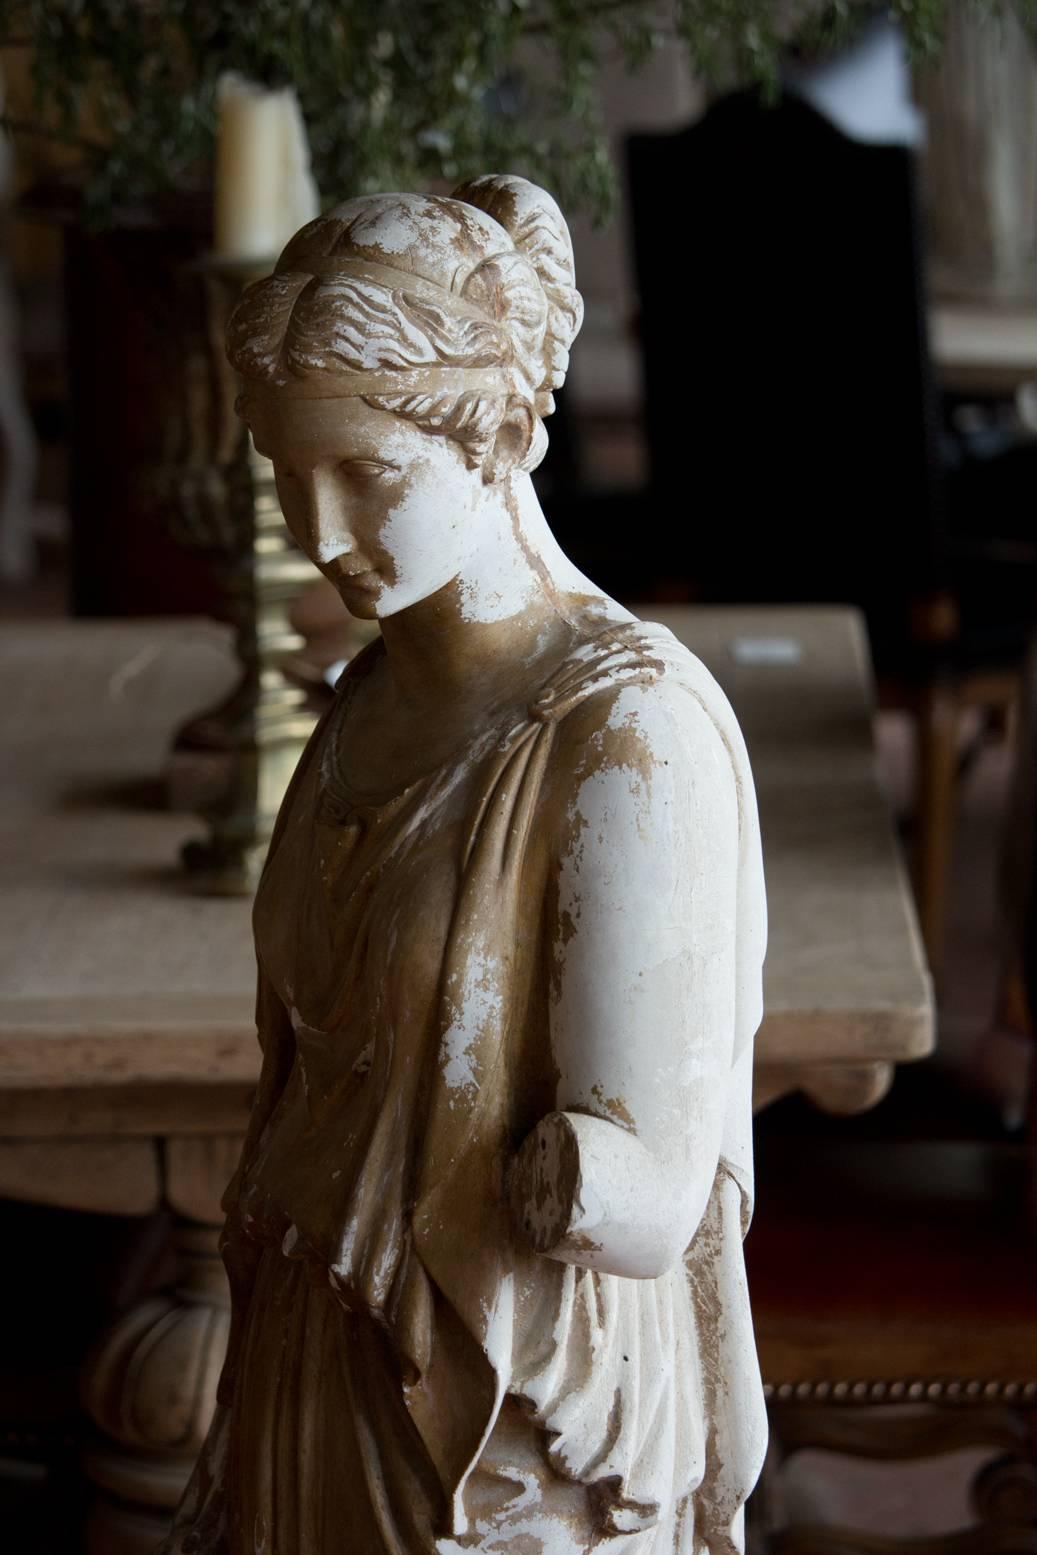 Antique Study in Plaster, Statue of Hebe 2